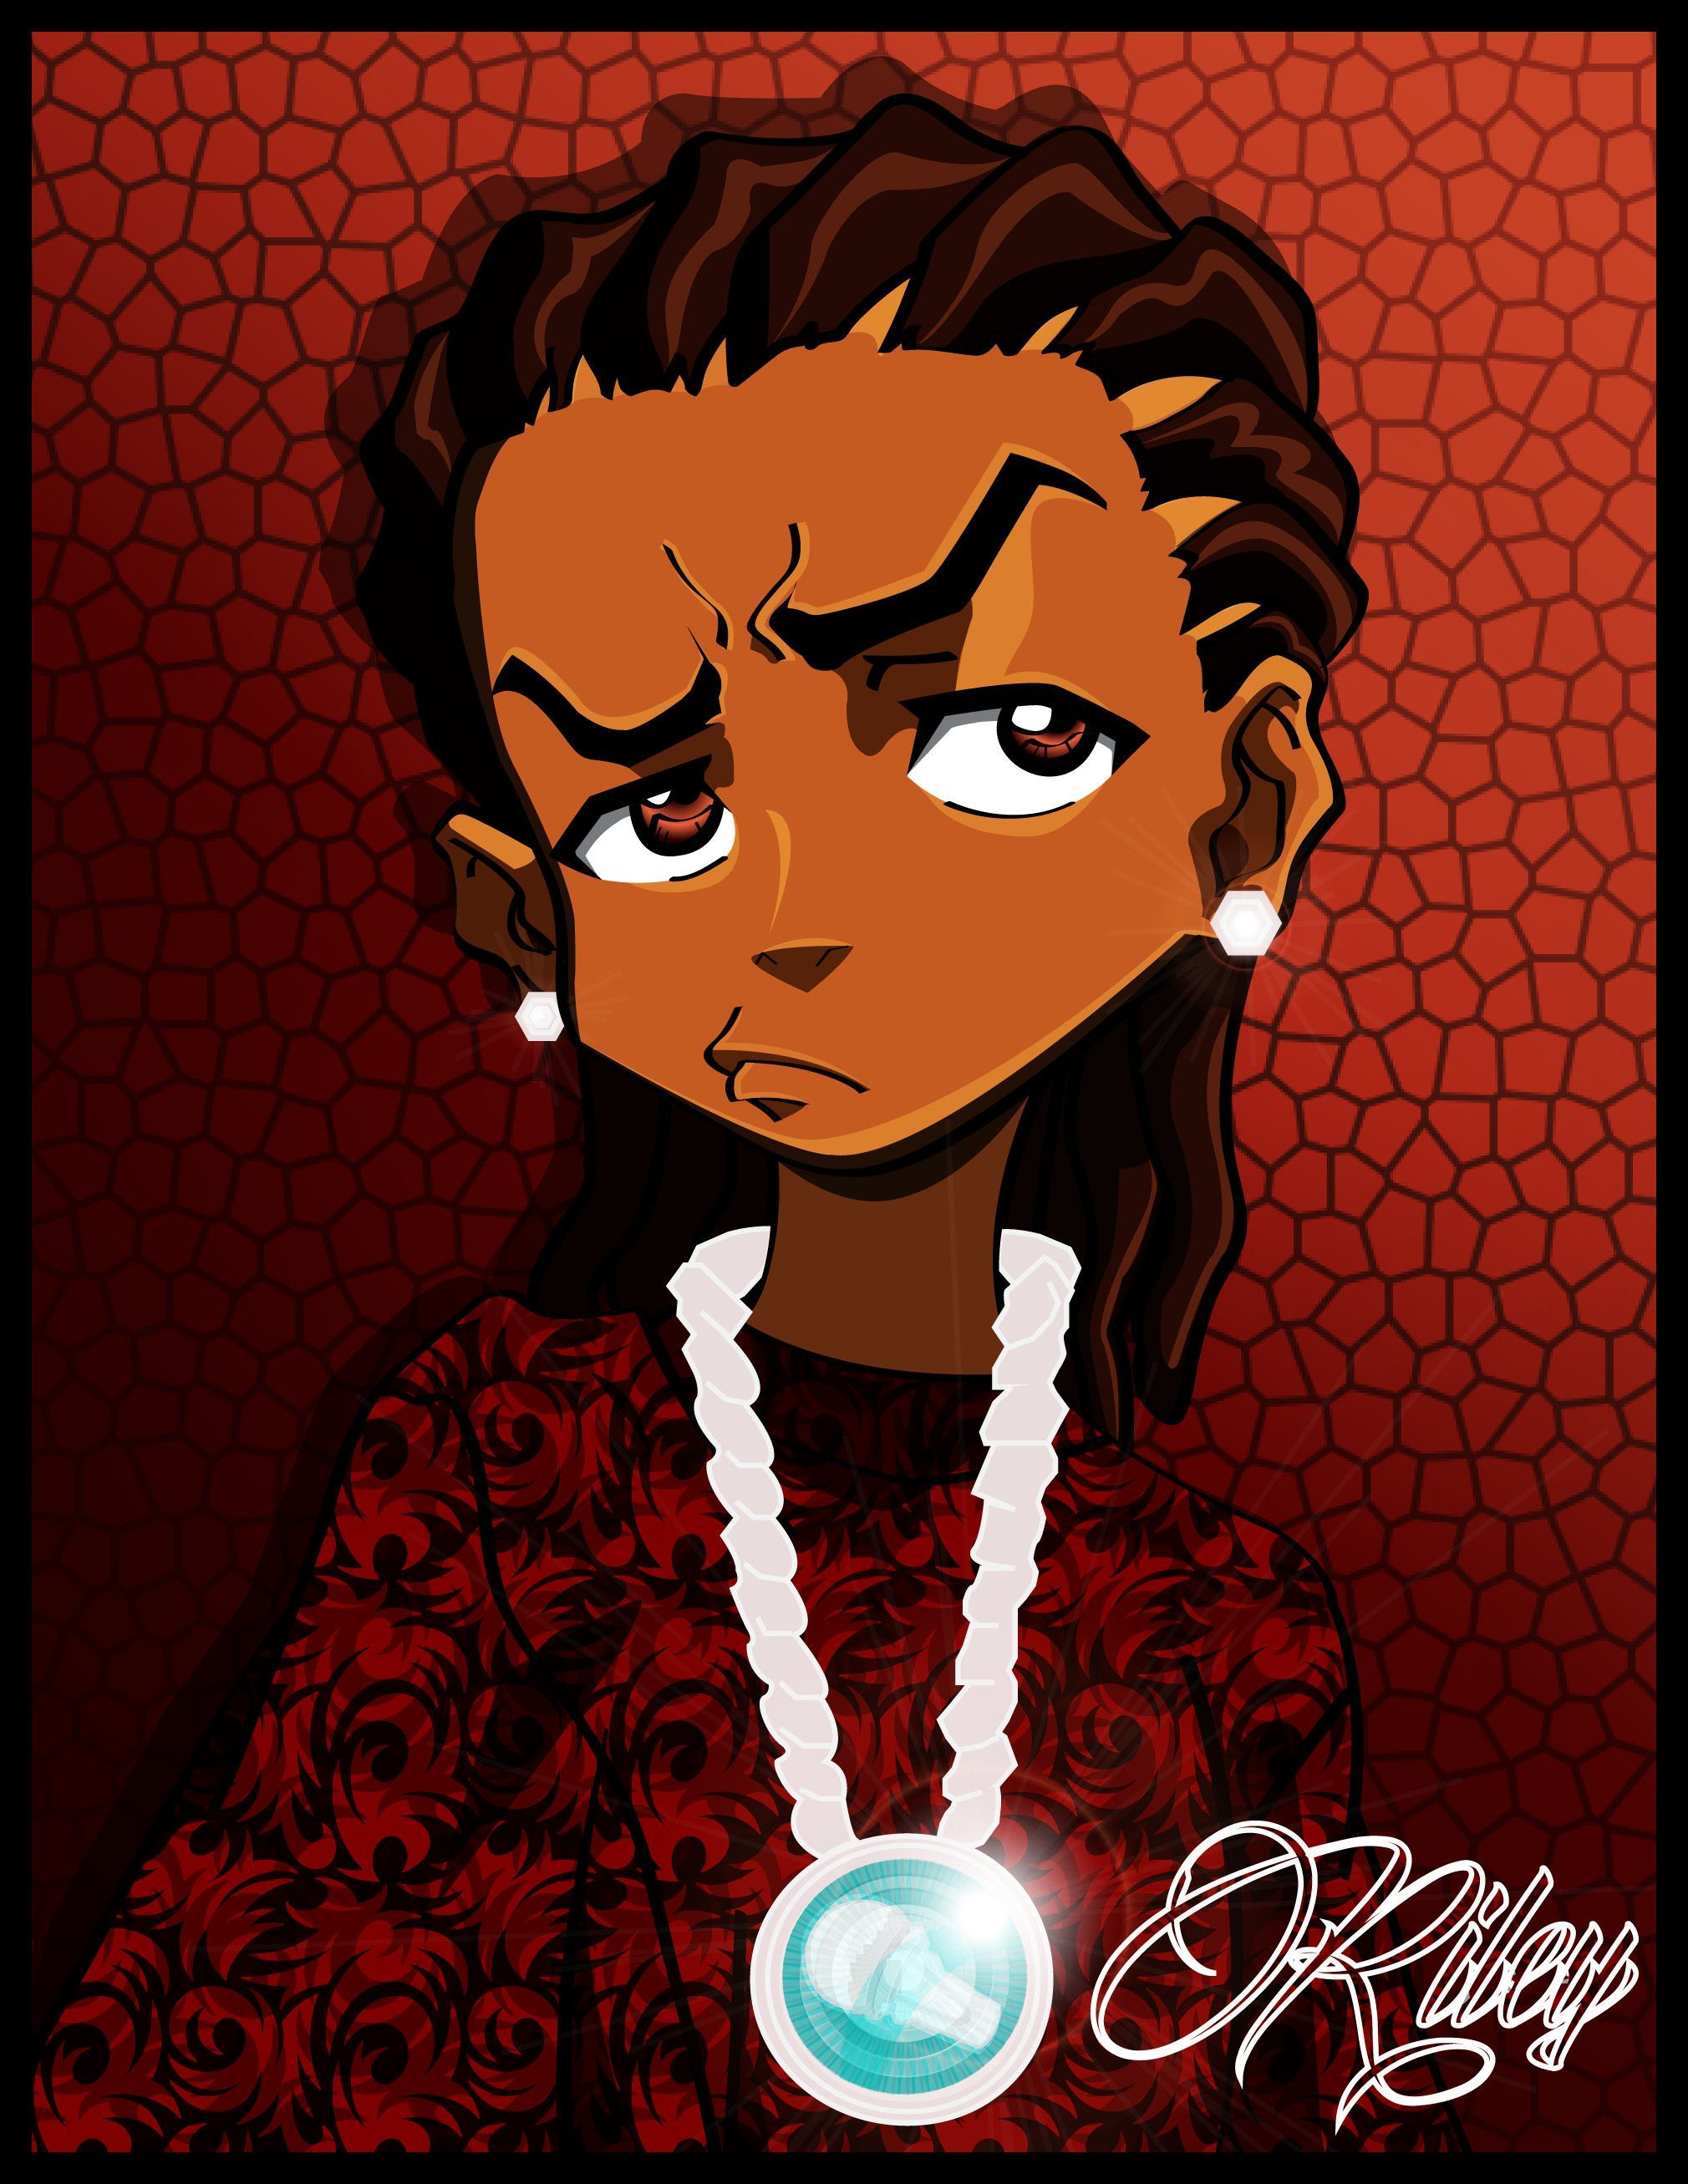 Boondocks iPhone Wallpaper & Background Beautiful Best Available For Download Boondocks iPhone Photo Free On Zicxa.com Image